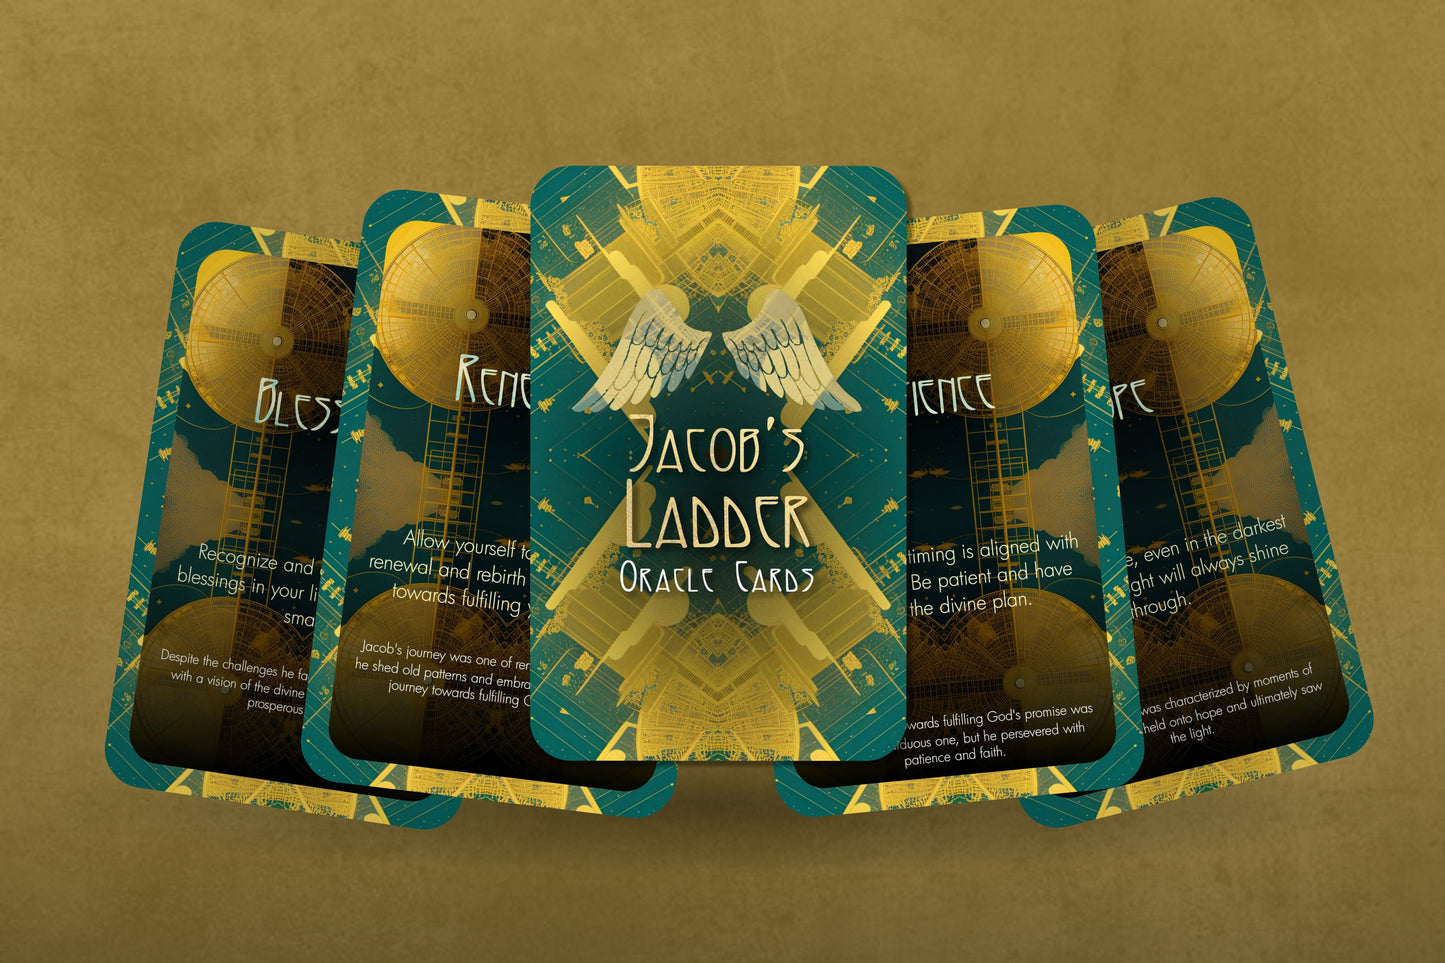 Jacob's Ladder Oracle